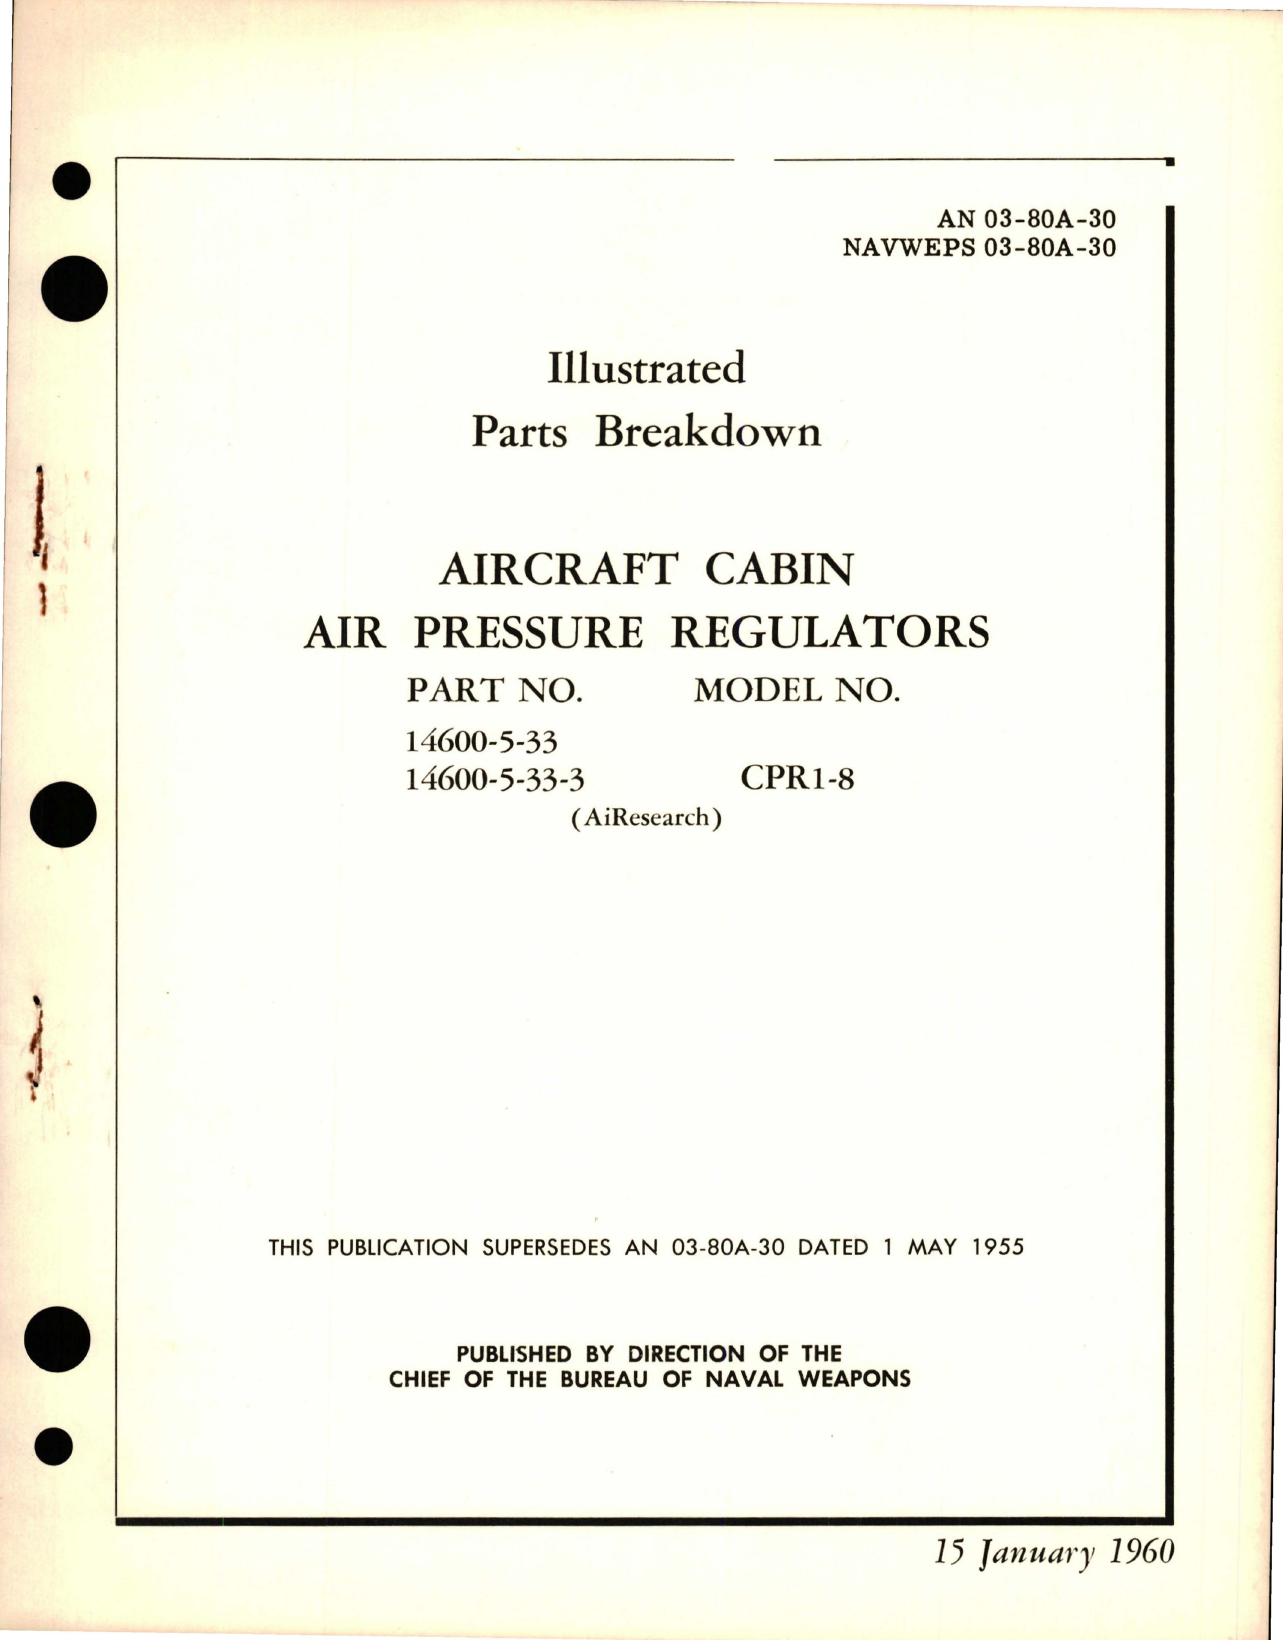 Sample page 1 from AirCorps Library document: Illustrated Parts Breakdown for Aircraft Cabin Air Pressure Regulators - Parts 14600-5-33 and 14600-5-33-3 - Model CPR1-8